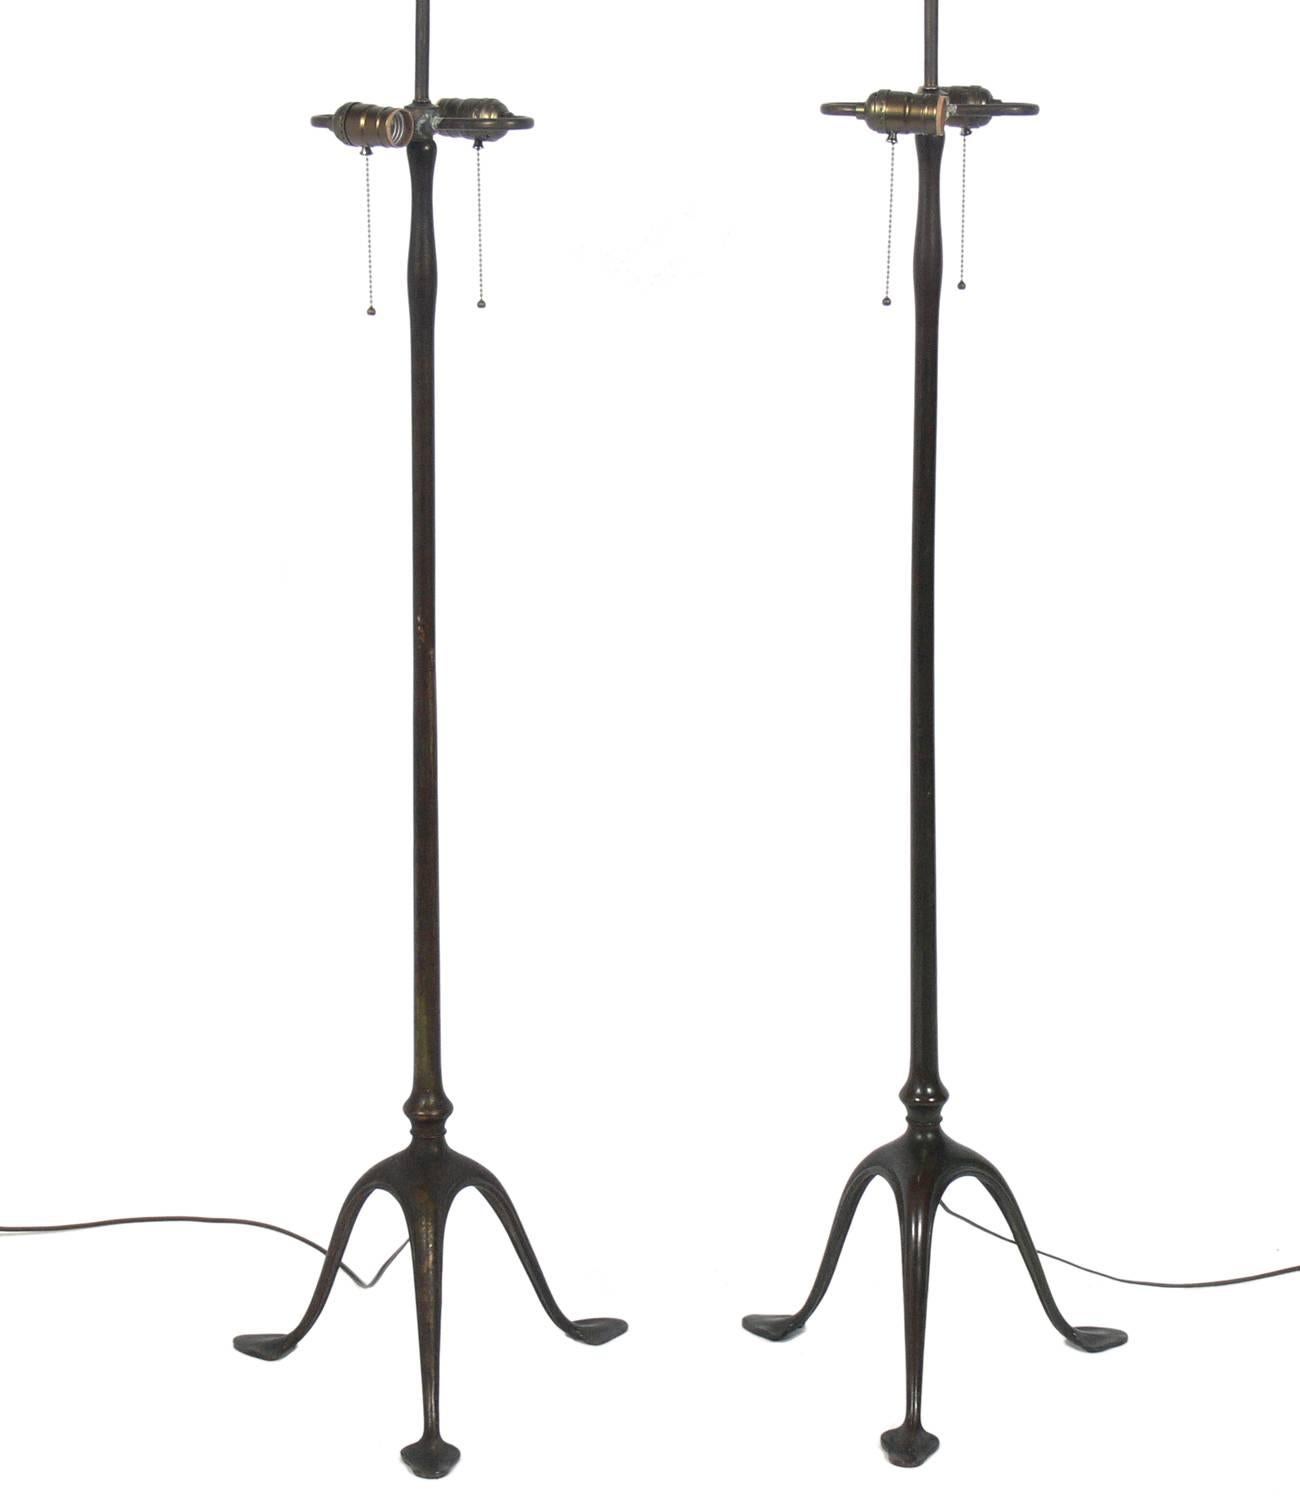 Patinated bronze floor lamps, designed for Tiffany Studios, American, circa early 1900s. They retain their warm original patina. We have always loved the sculptural bronze forms of these lamps and the addition of crisp paper shades give them a